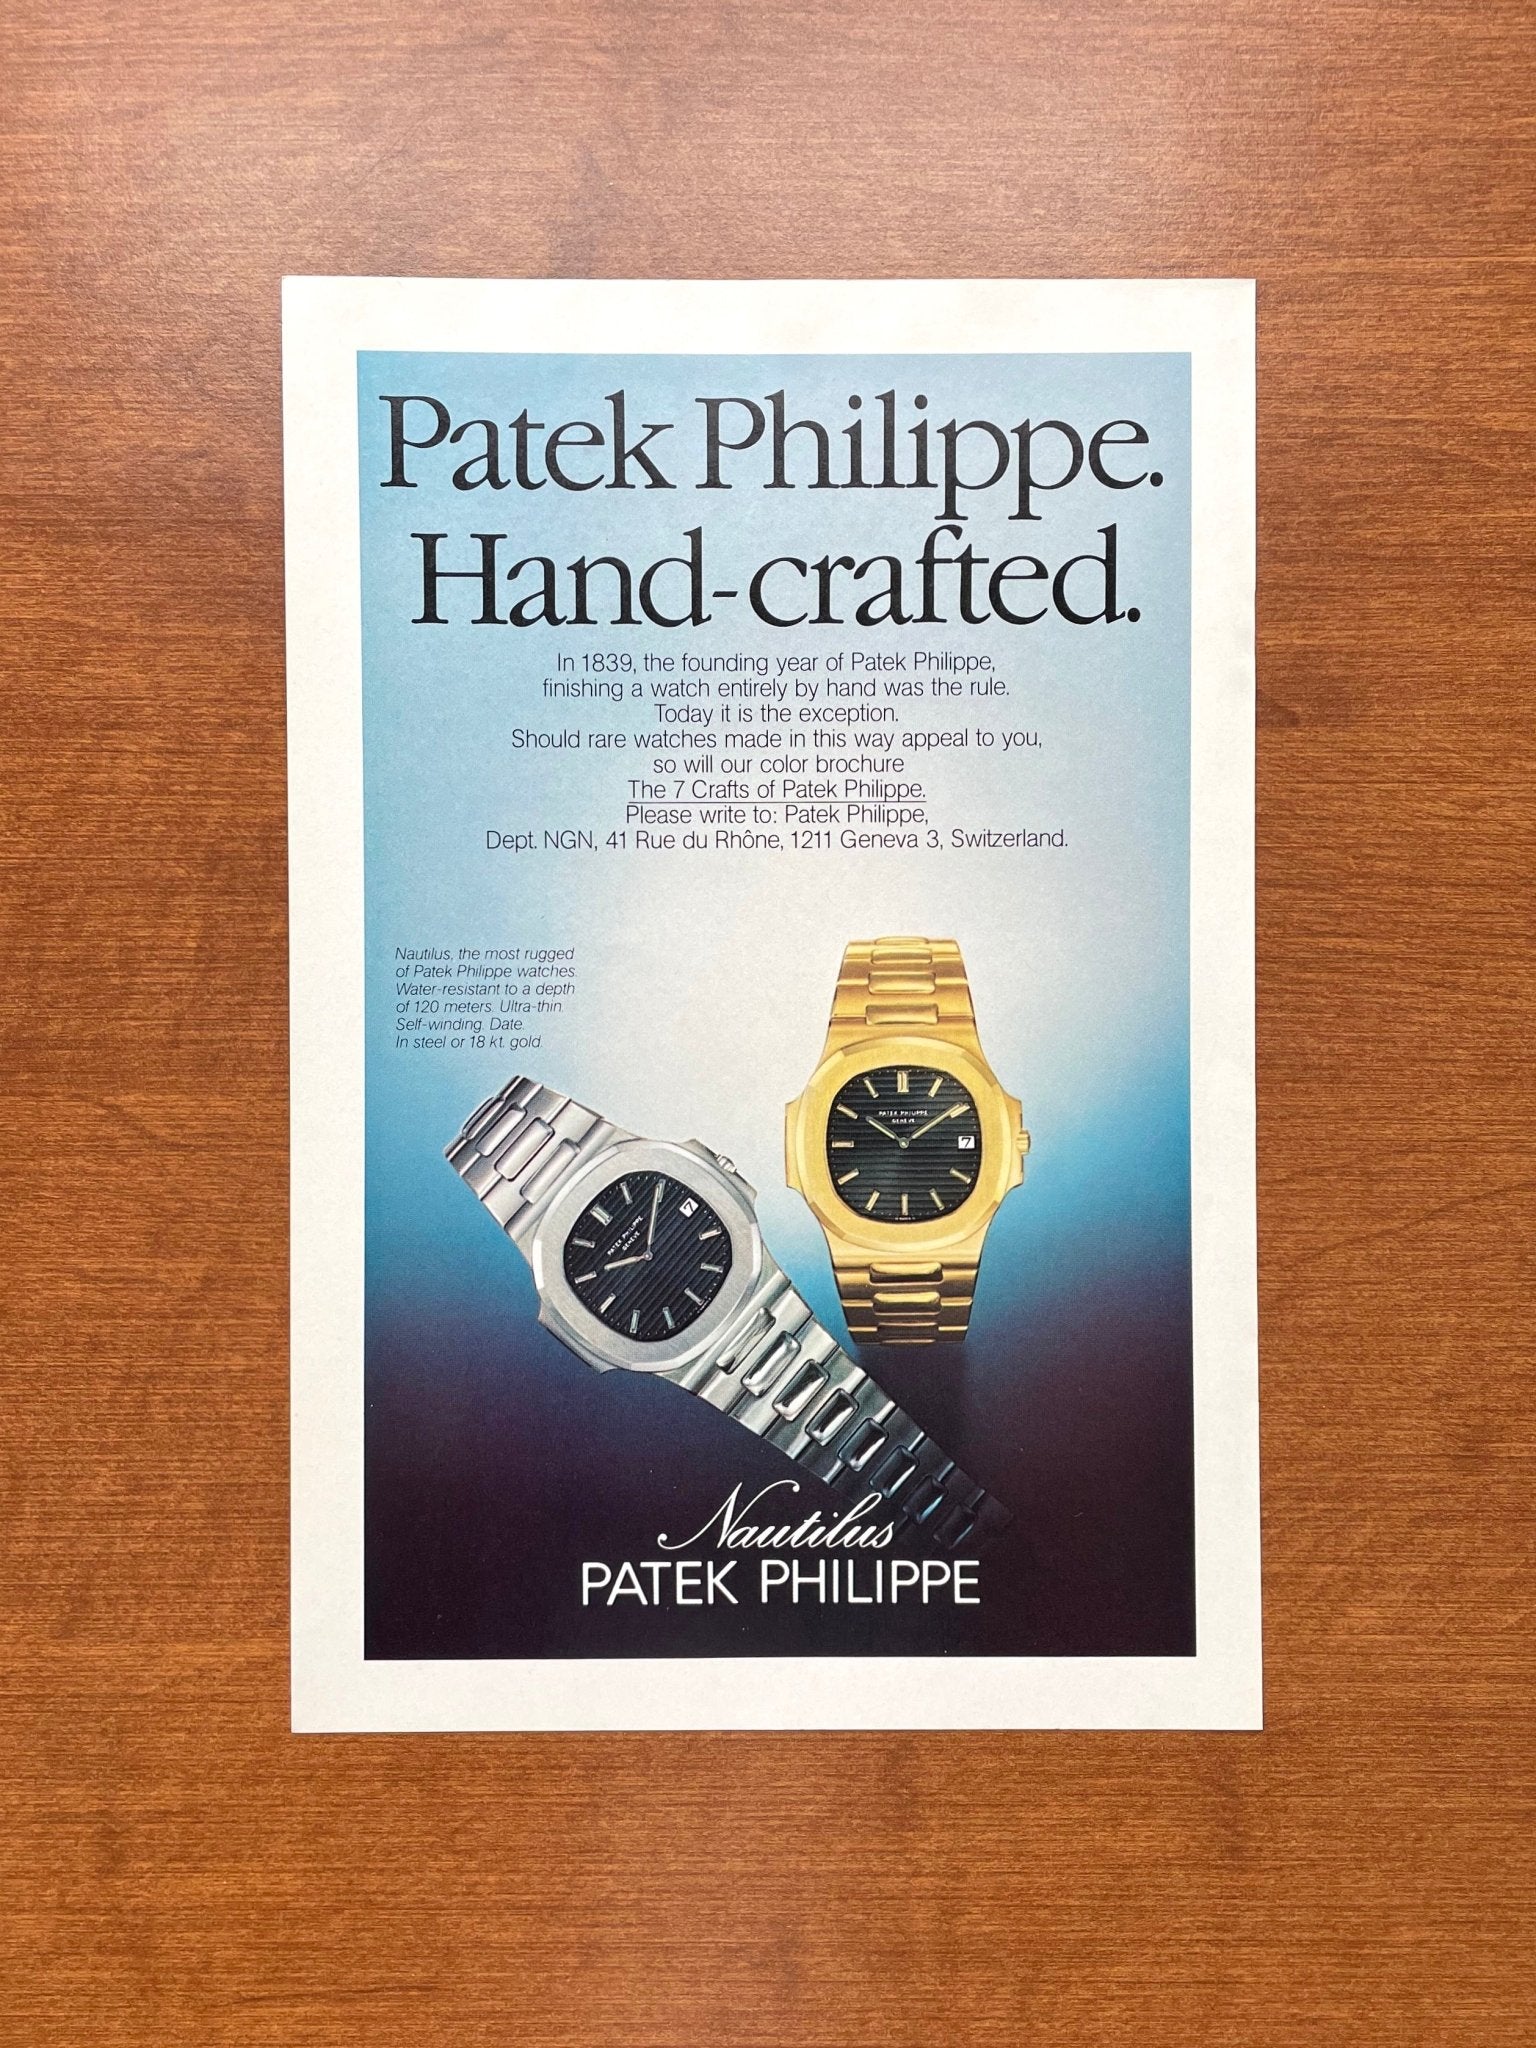 Here are the Apple Watch's first magazine ads